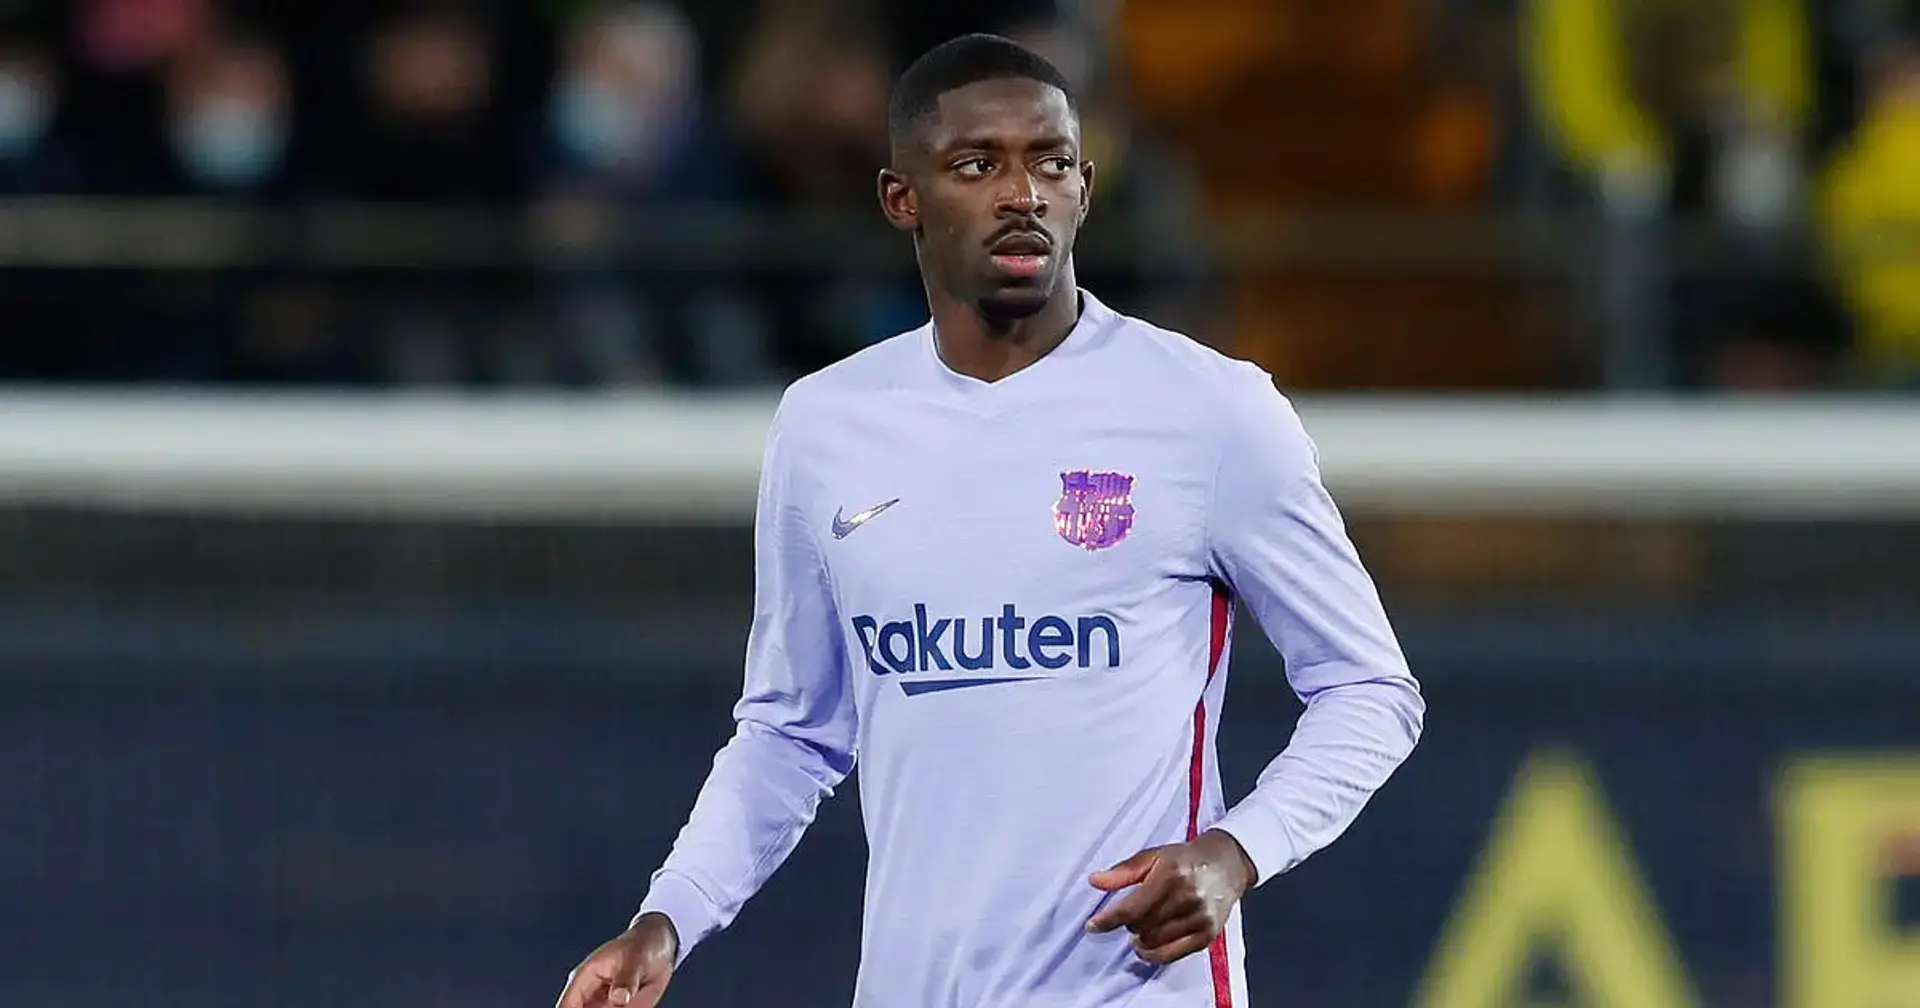 Dembele agent sets ultimatum: bigger salary or player leaves for free (reliability: 4 stars)